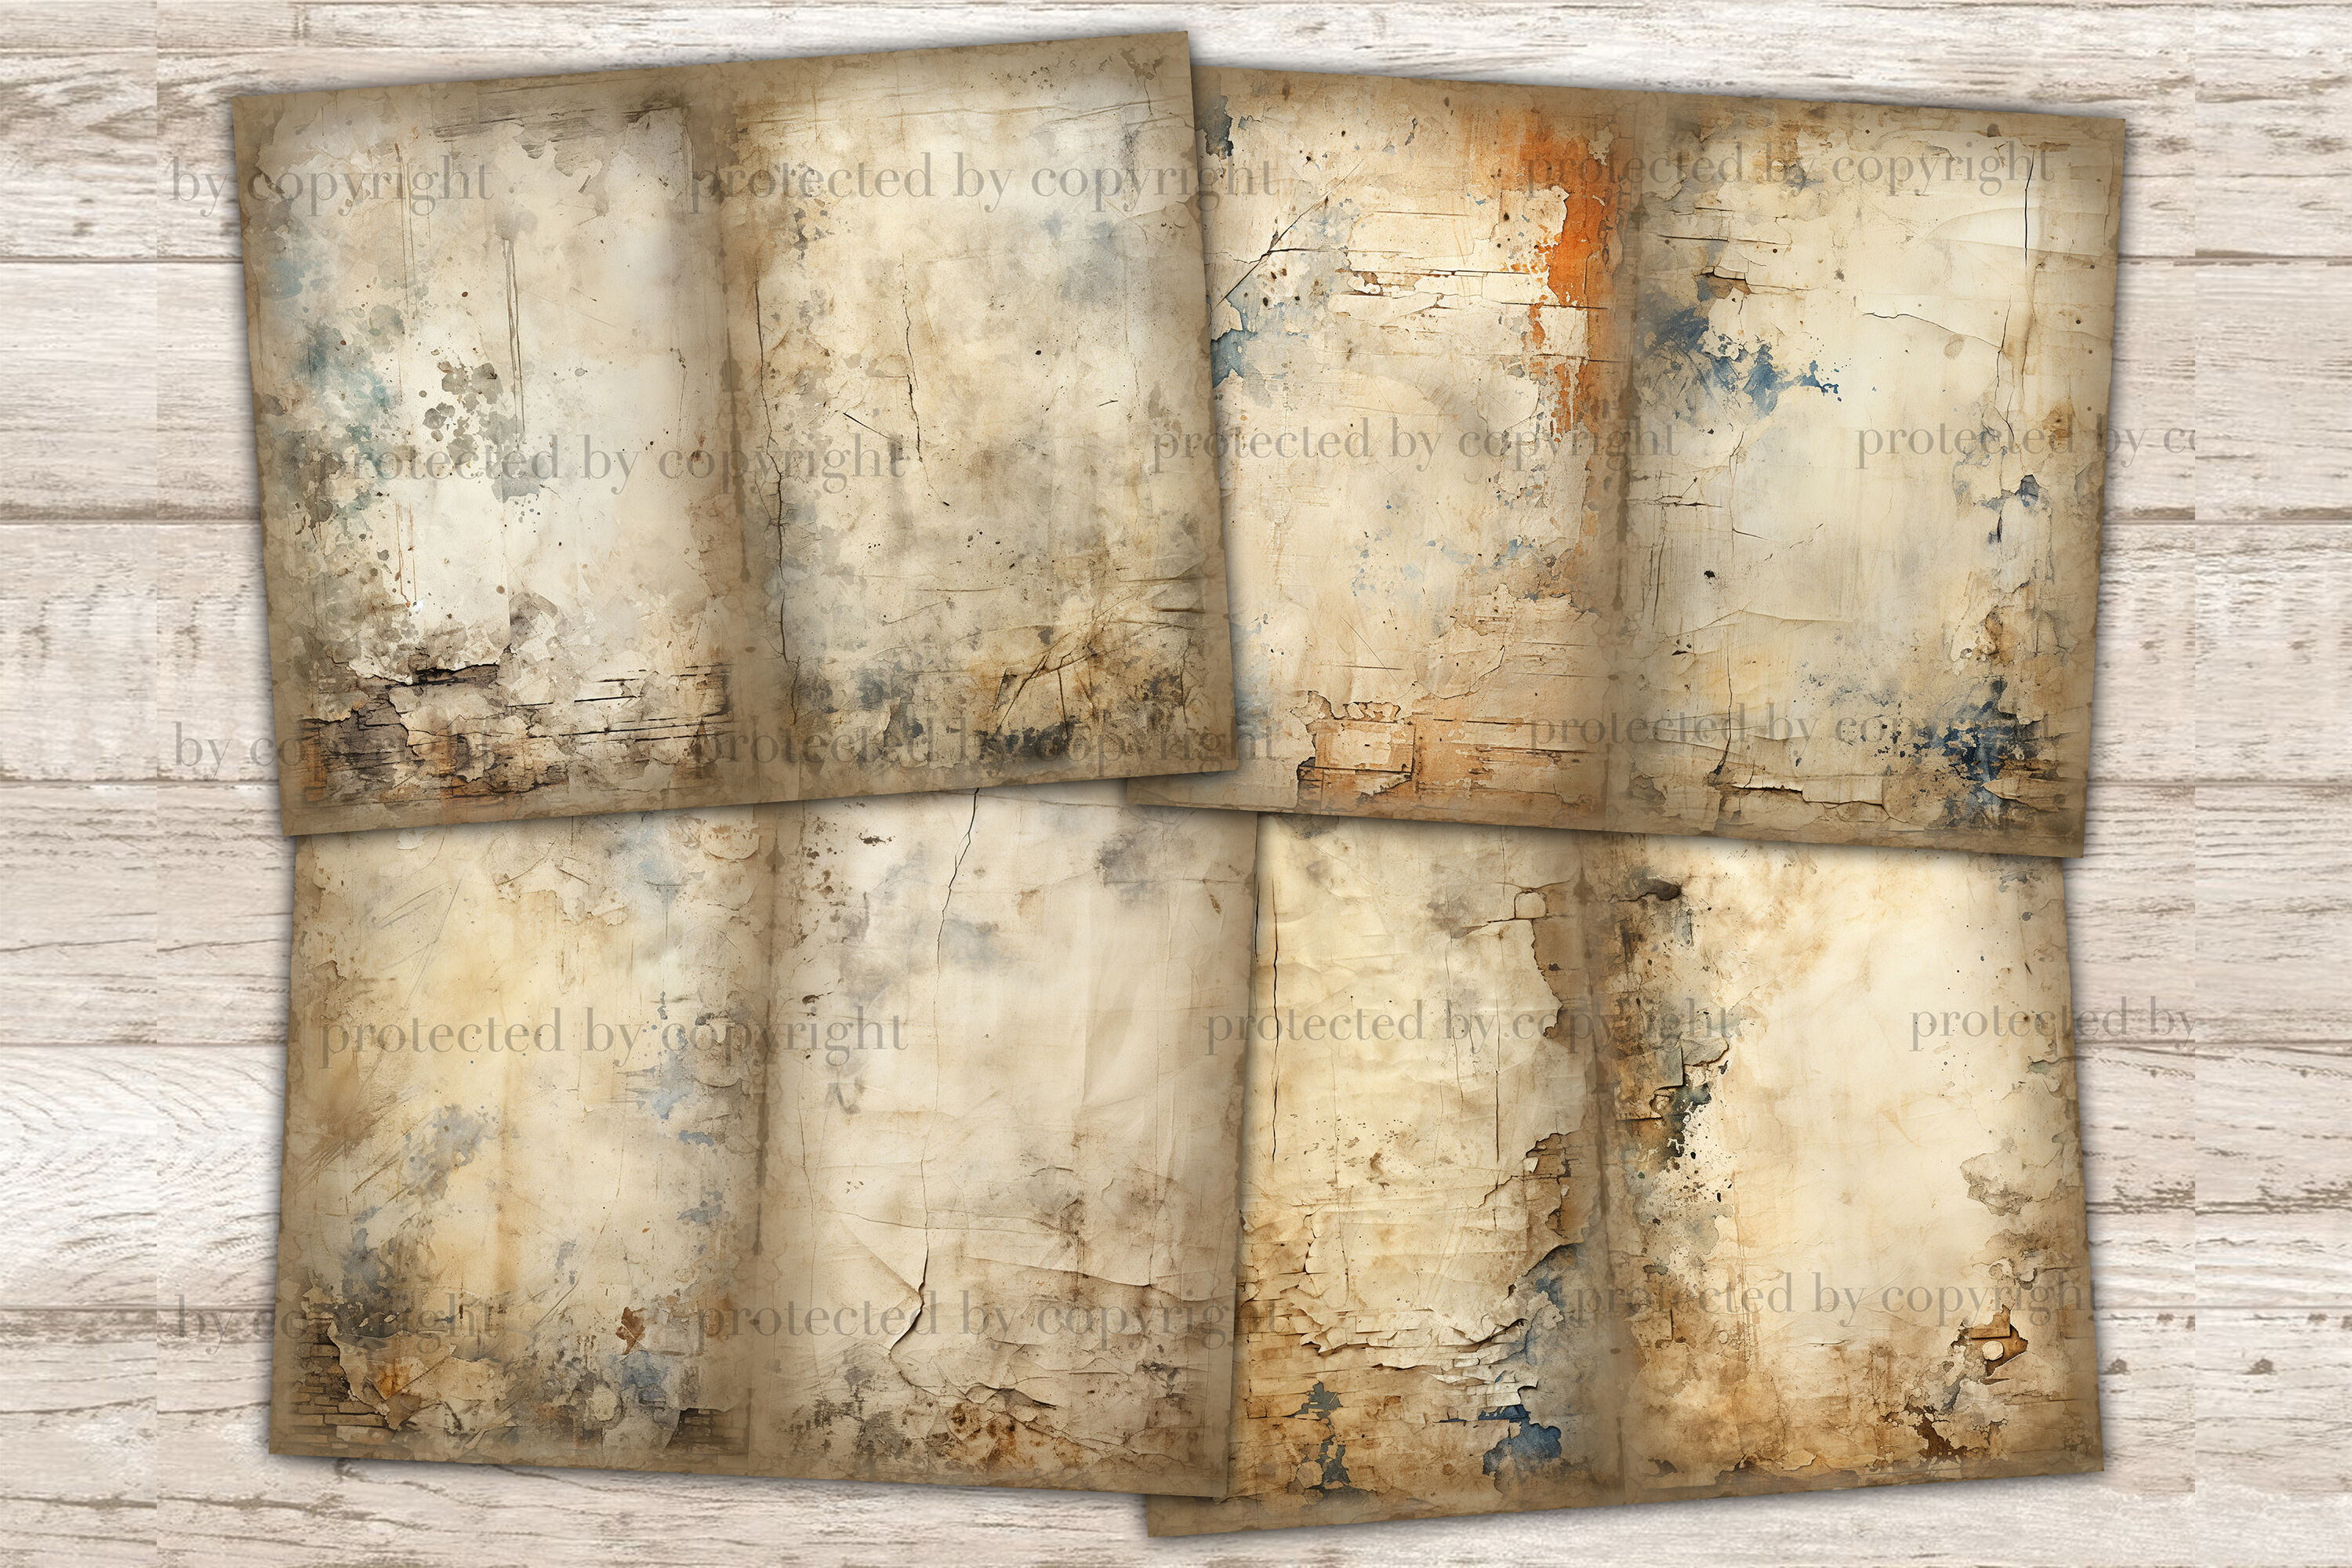 Distressed Junk Journal Pages, Blank Scrapbook Paper By GlamArtZhanna